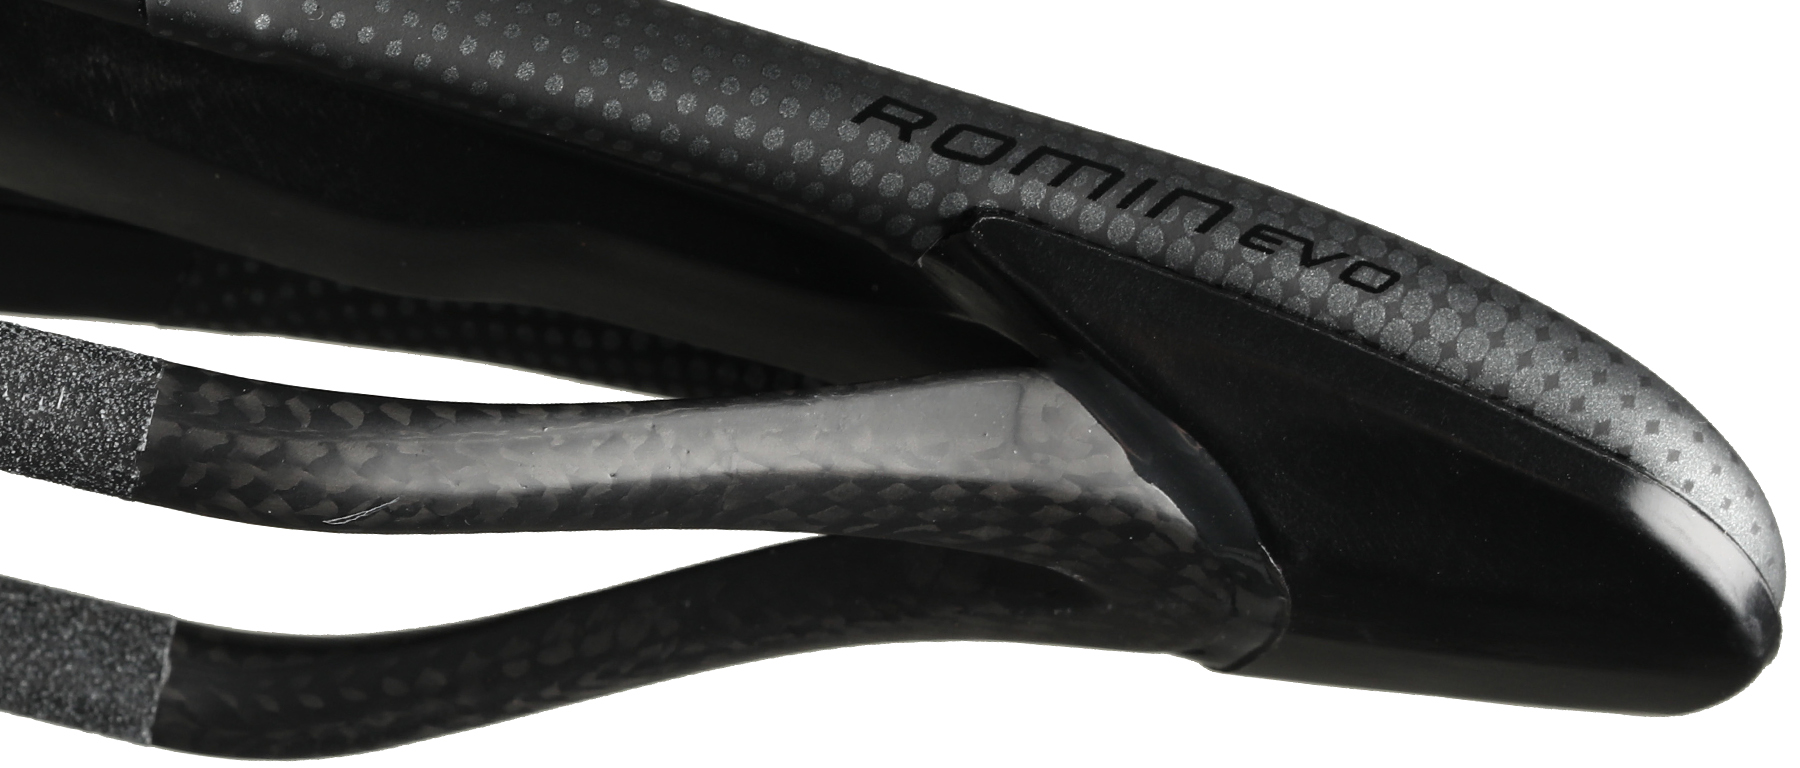 Specialized Romin EVO Pro Saddle with MIMIC